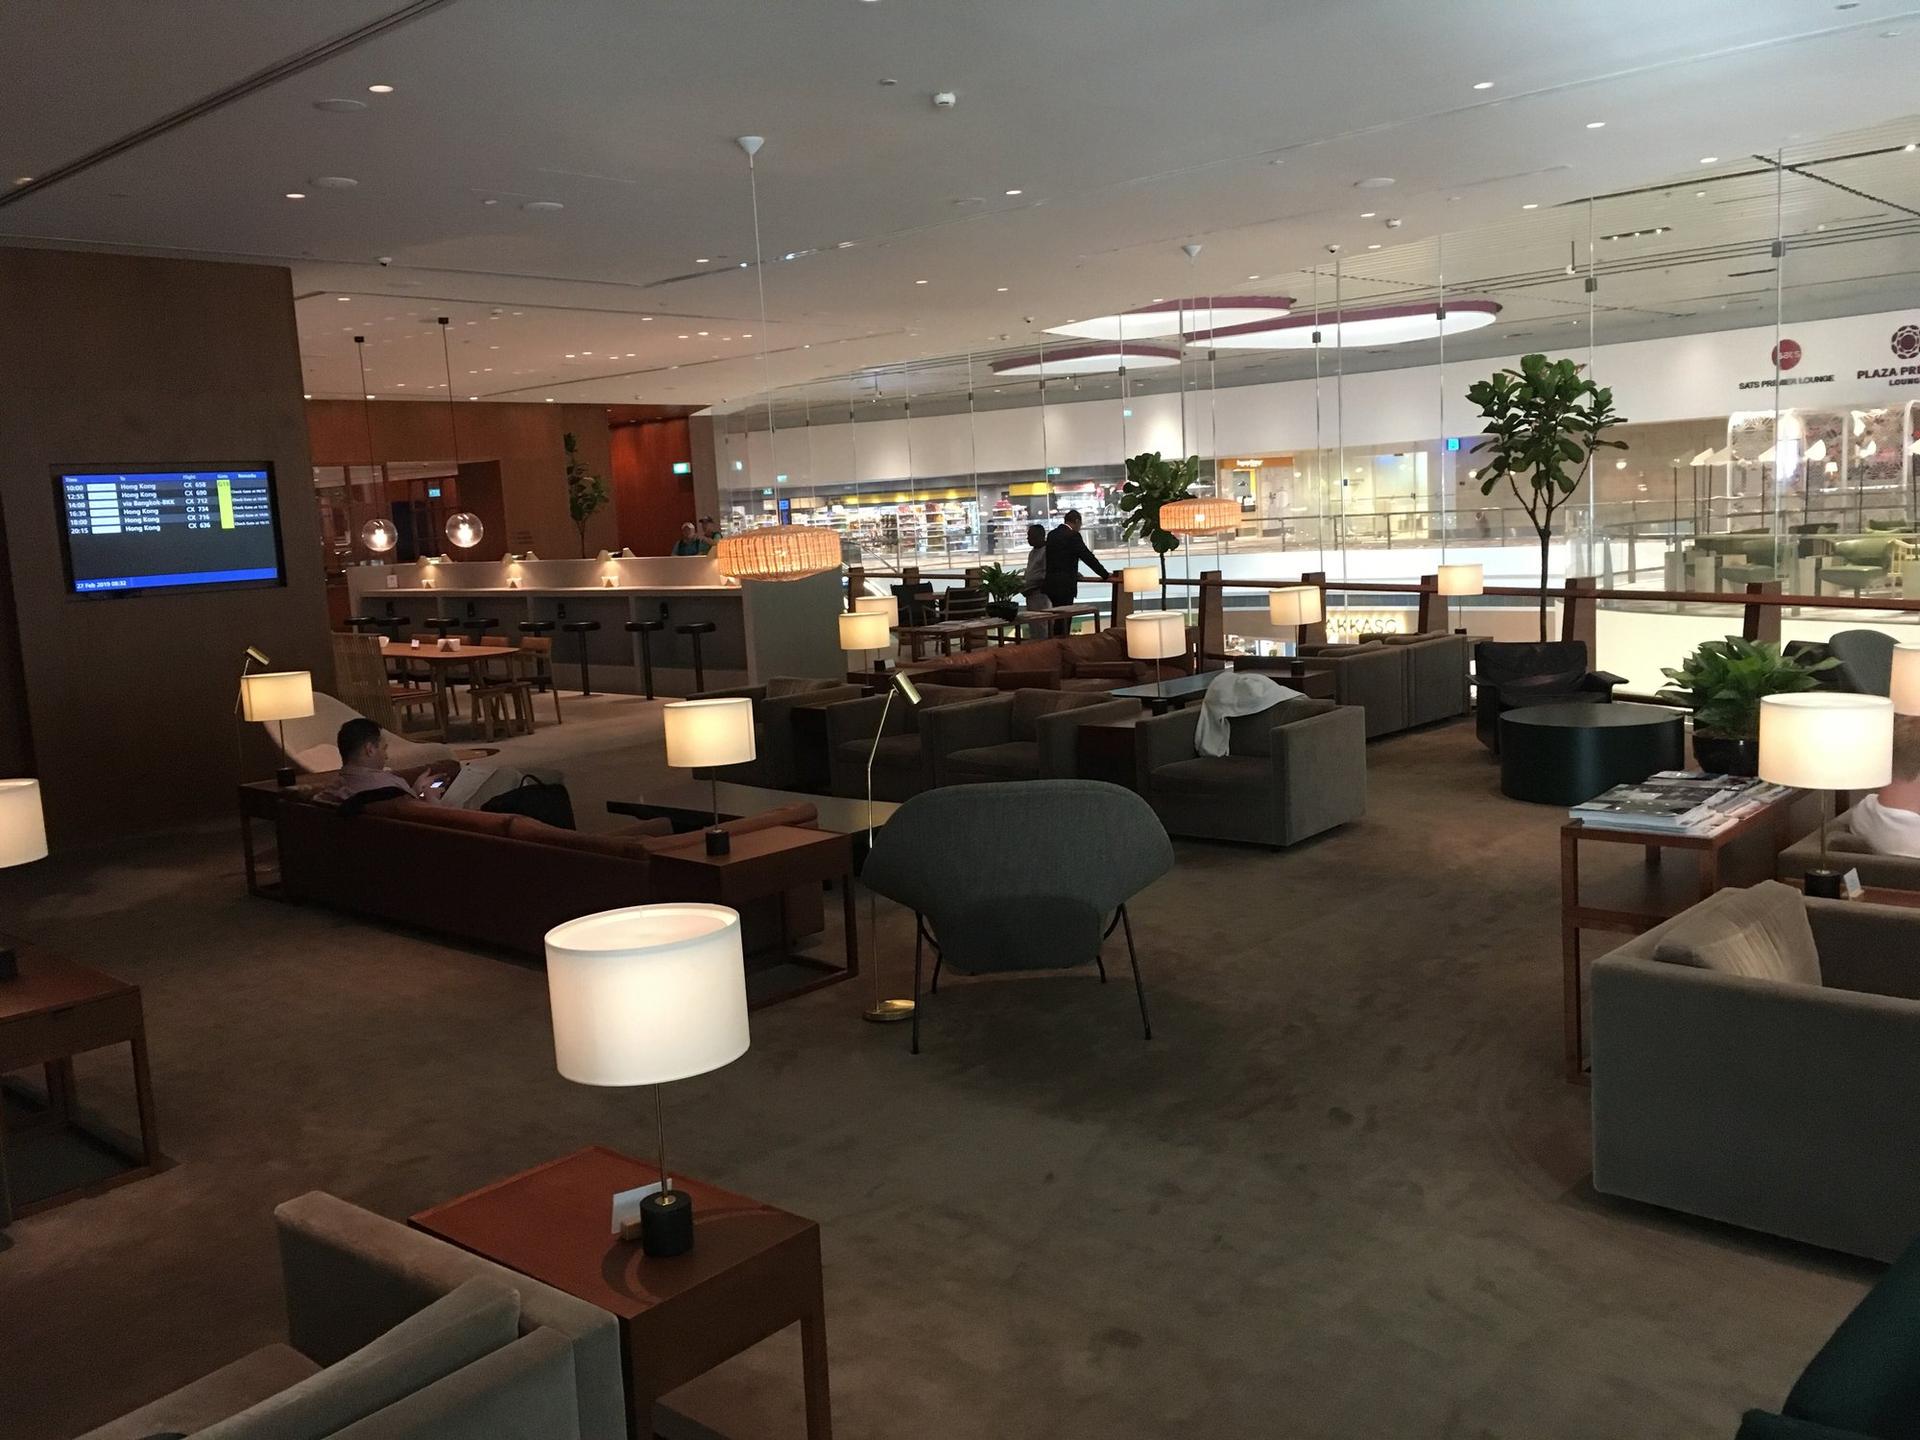 Cathay Pacific Lounge image 40 of 60